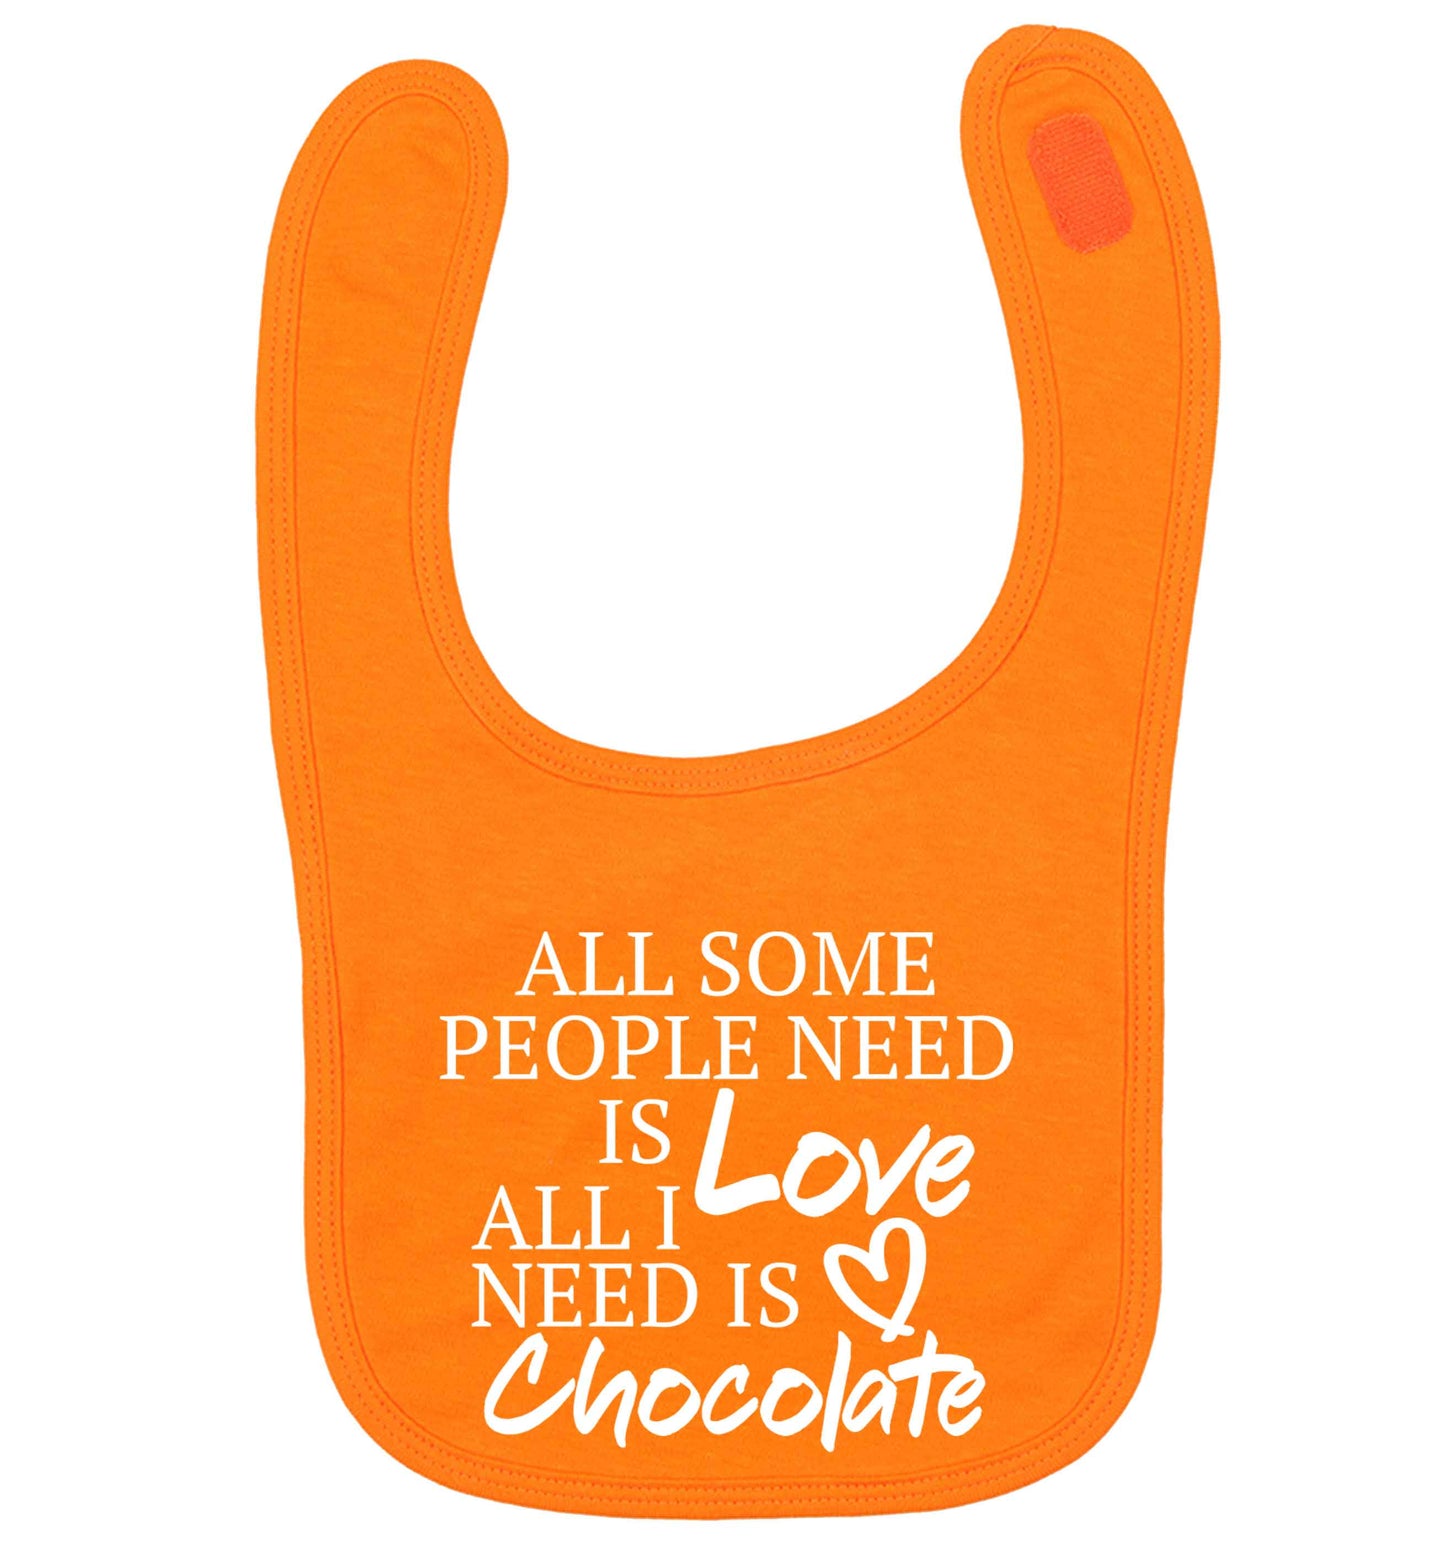 All some people need is love all I need is chocolate orange baby bib